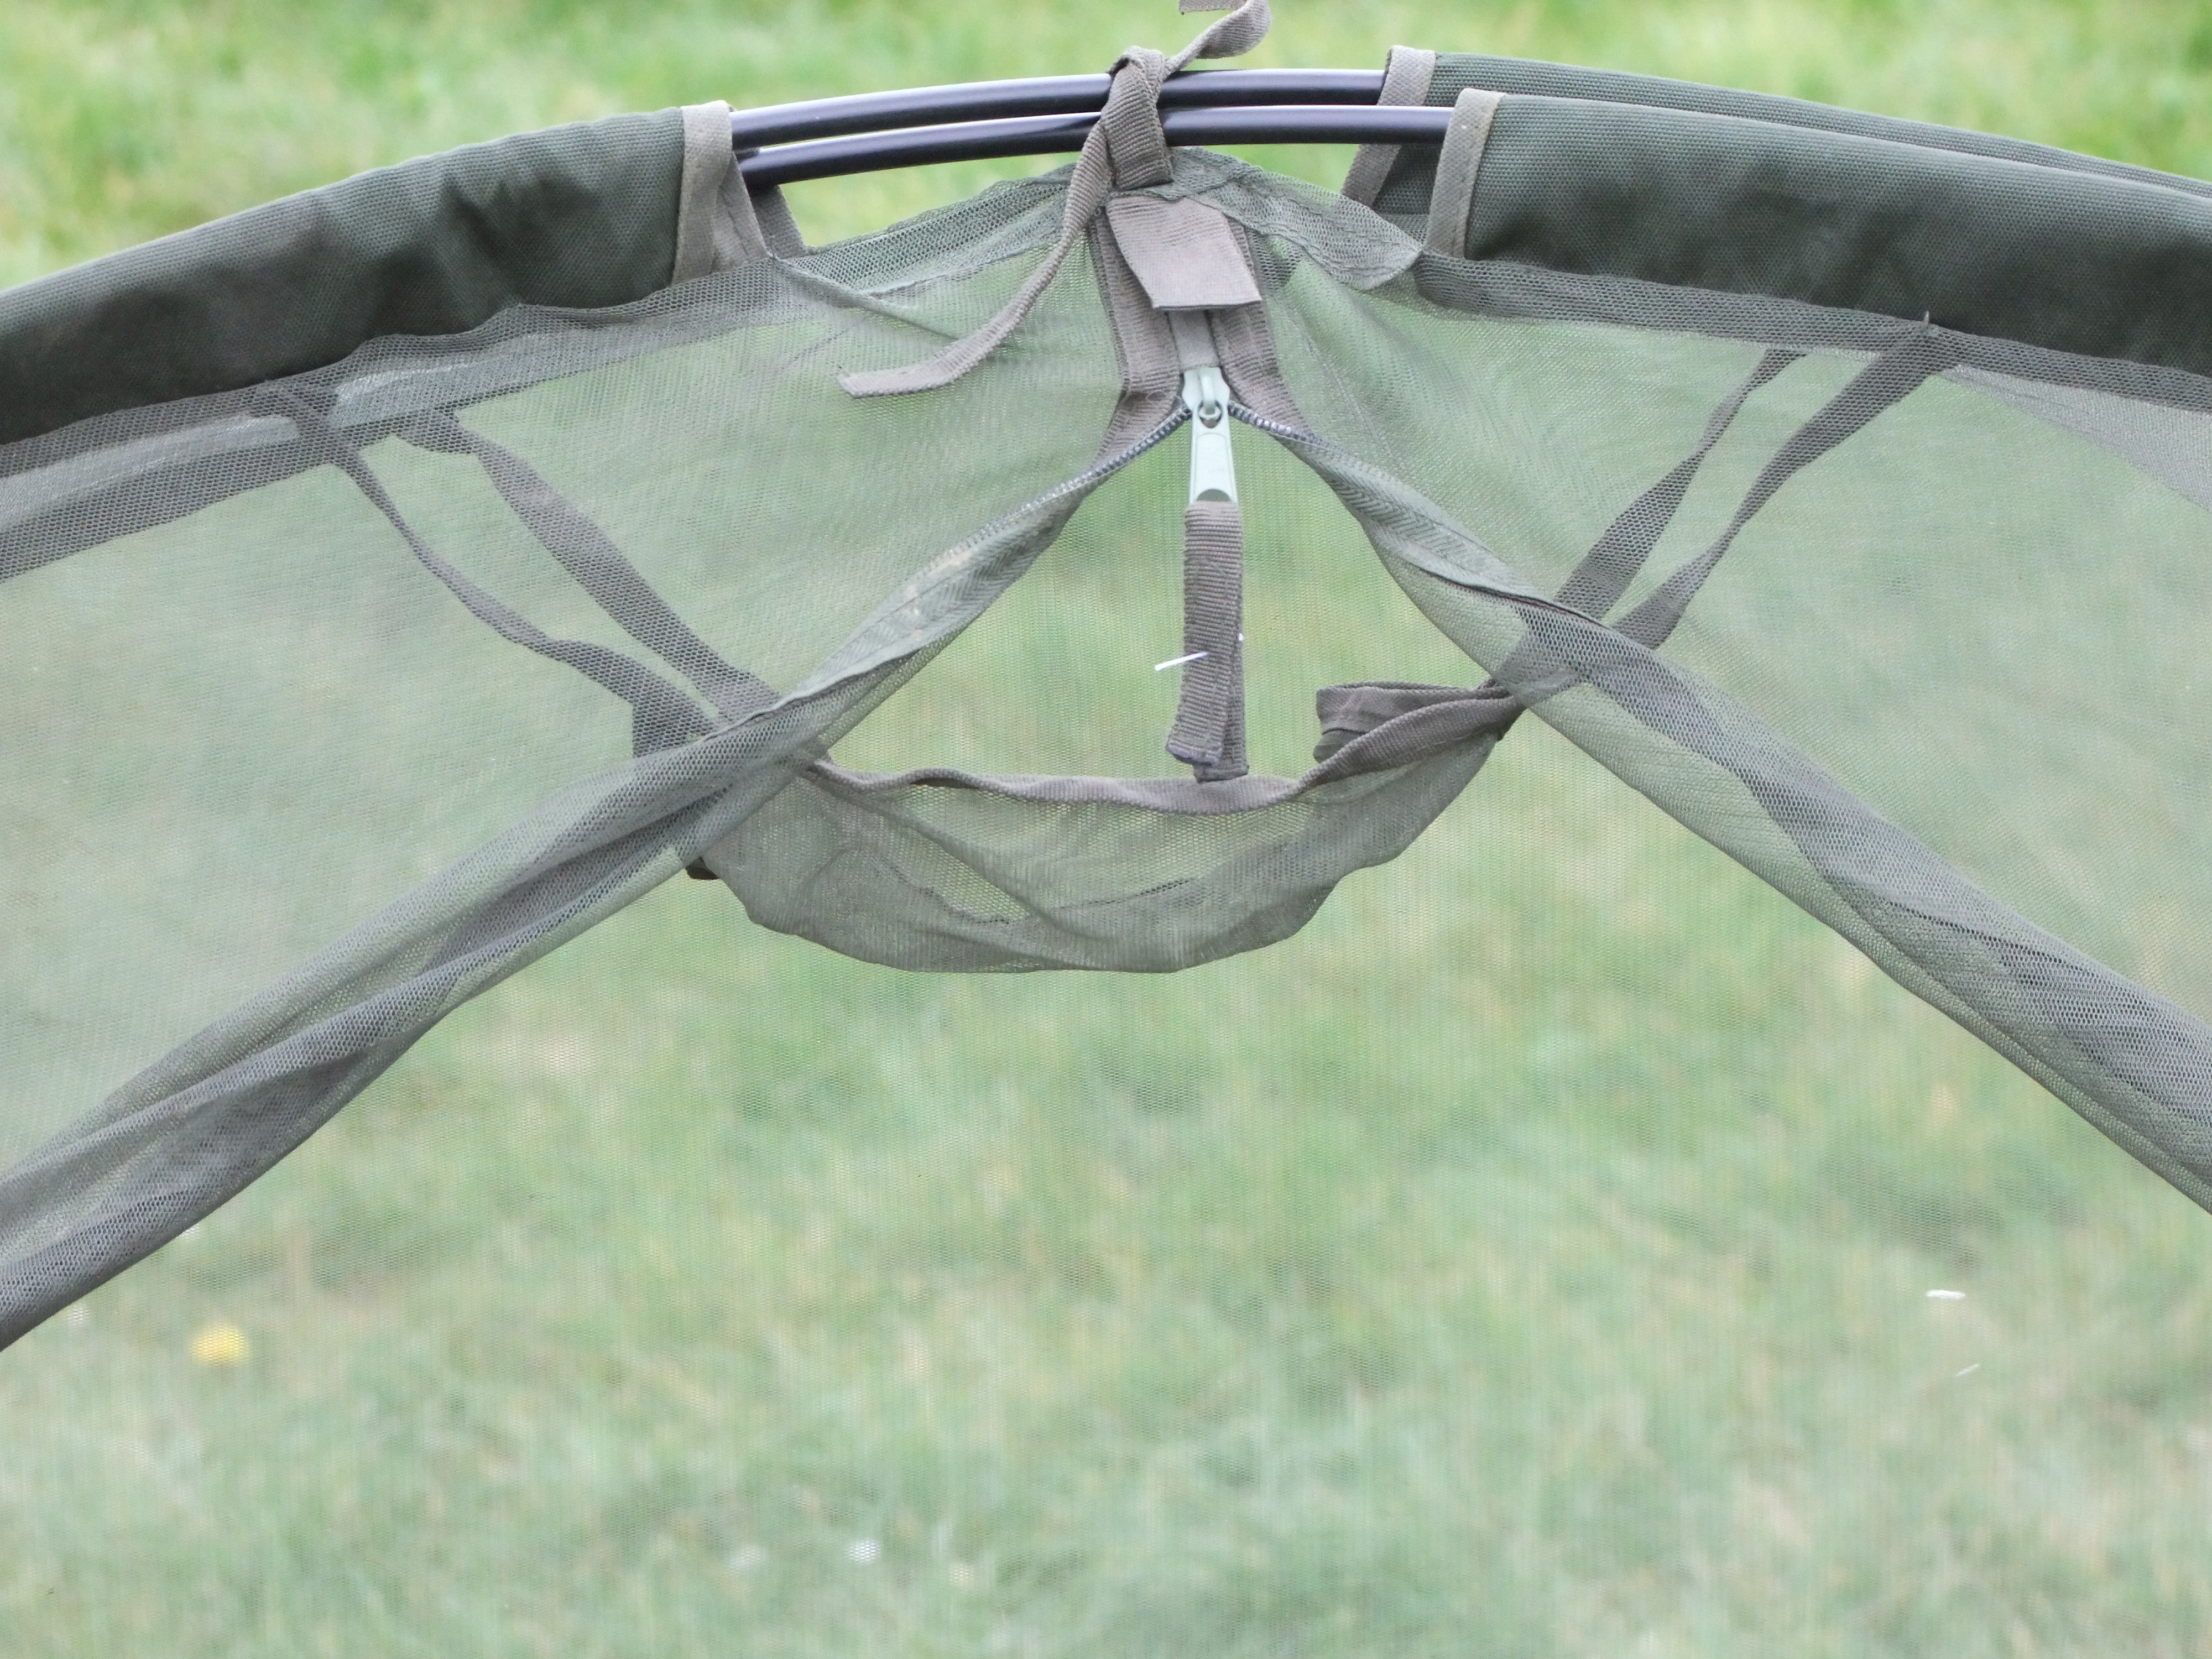 Army Combat Uniform's insect repellent at center of fraud case - Task &  Purpose